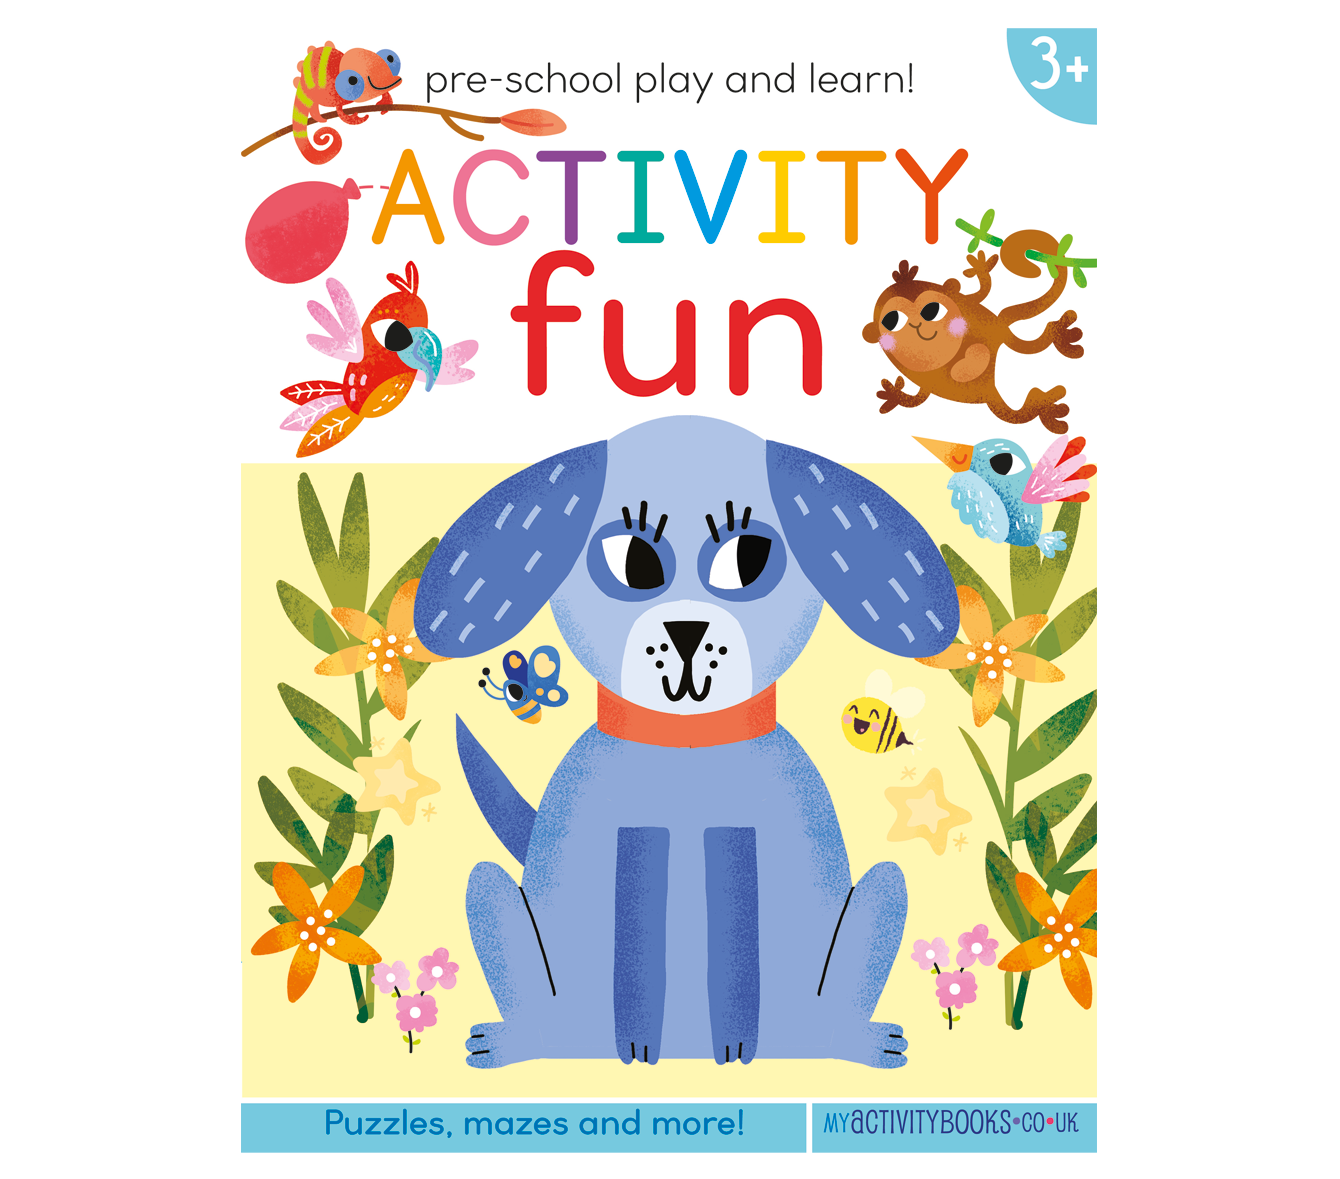 kids learning books activity book for pre-school